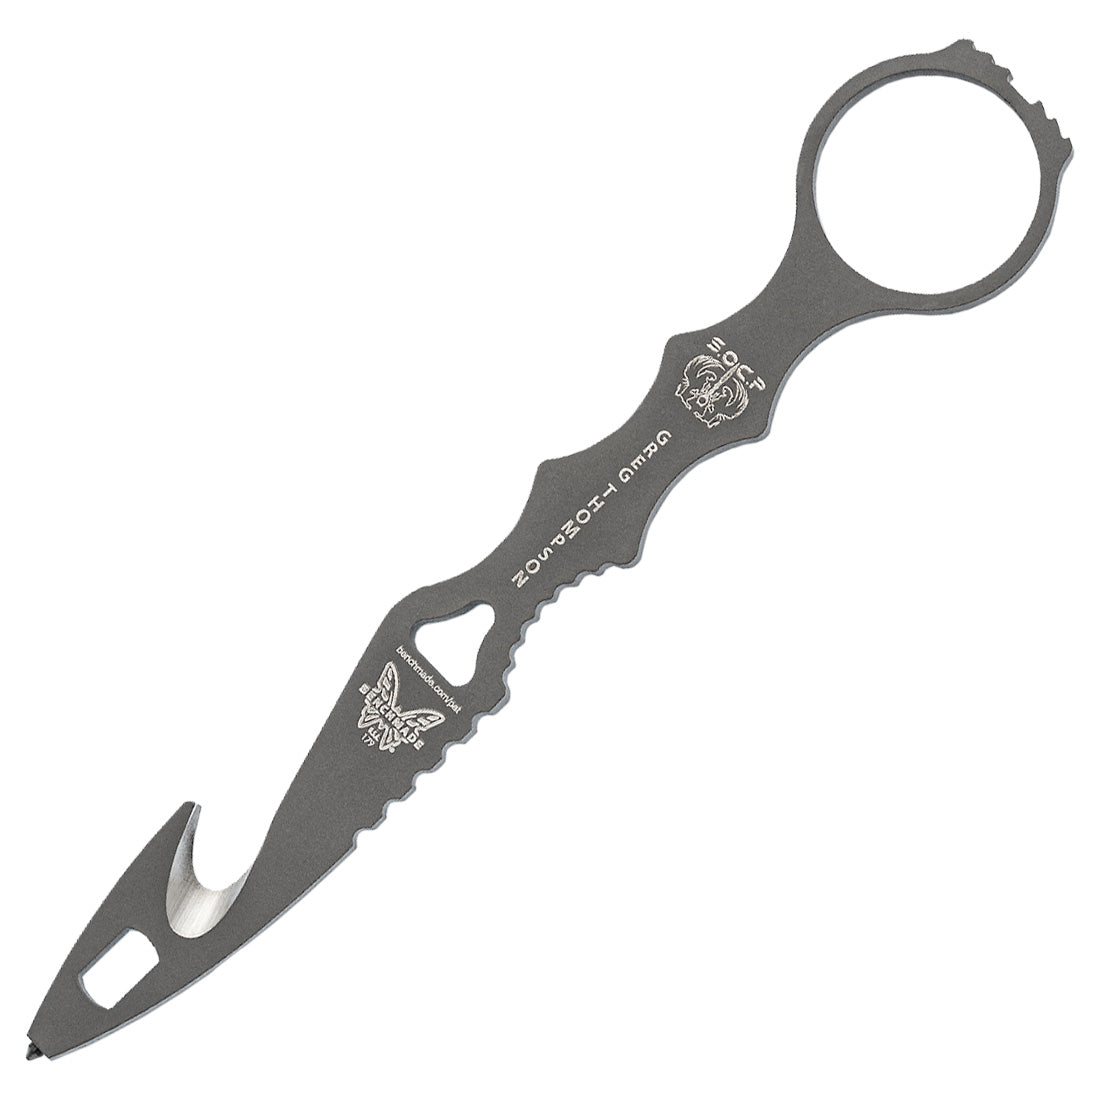 Benchmade SOCP Rescue Tool (179GRY)